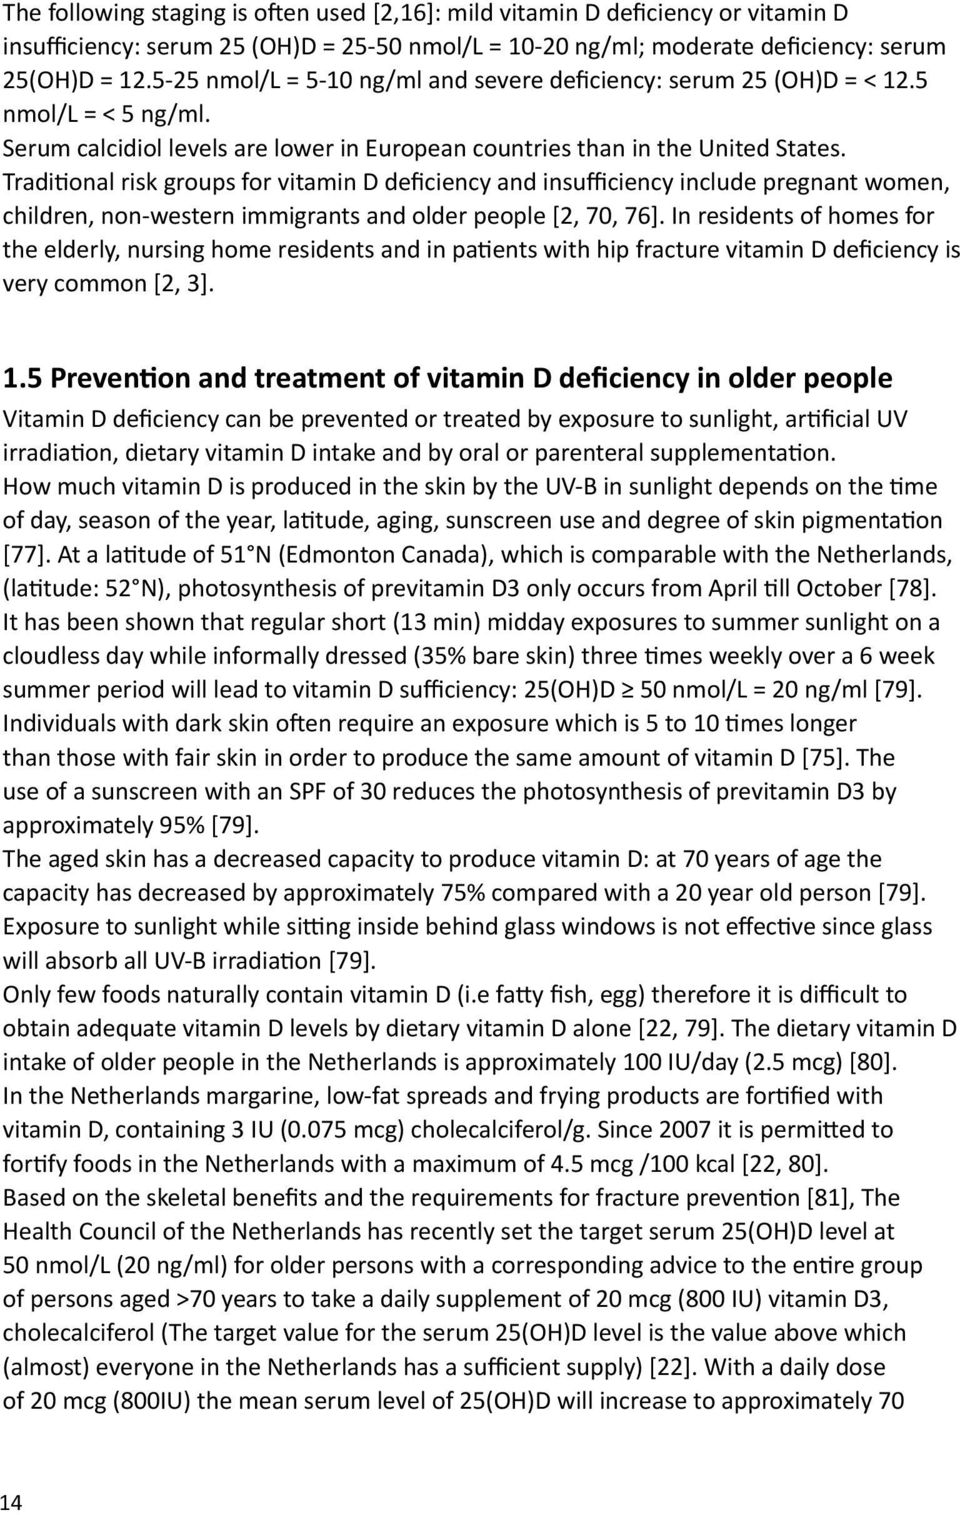 Traditional risk groups for vitamin D deficiency and insufficiency include pregnant women, children, non-western immigrants and older people [2, 70, 76].